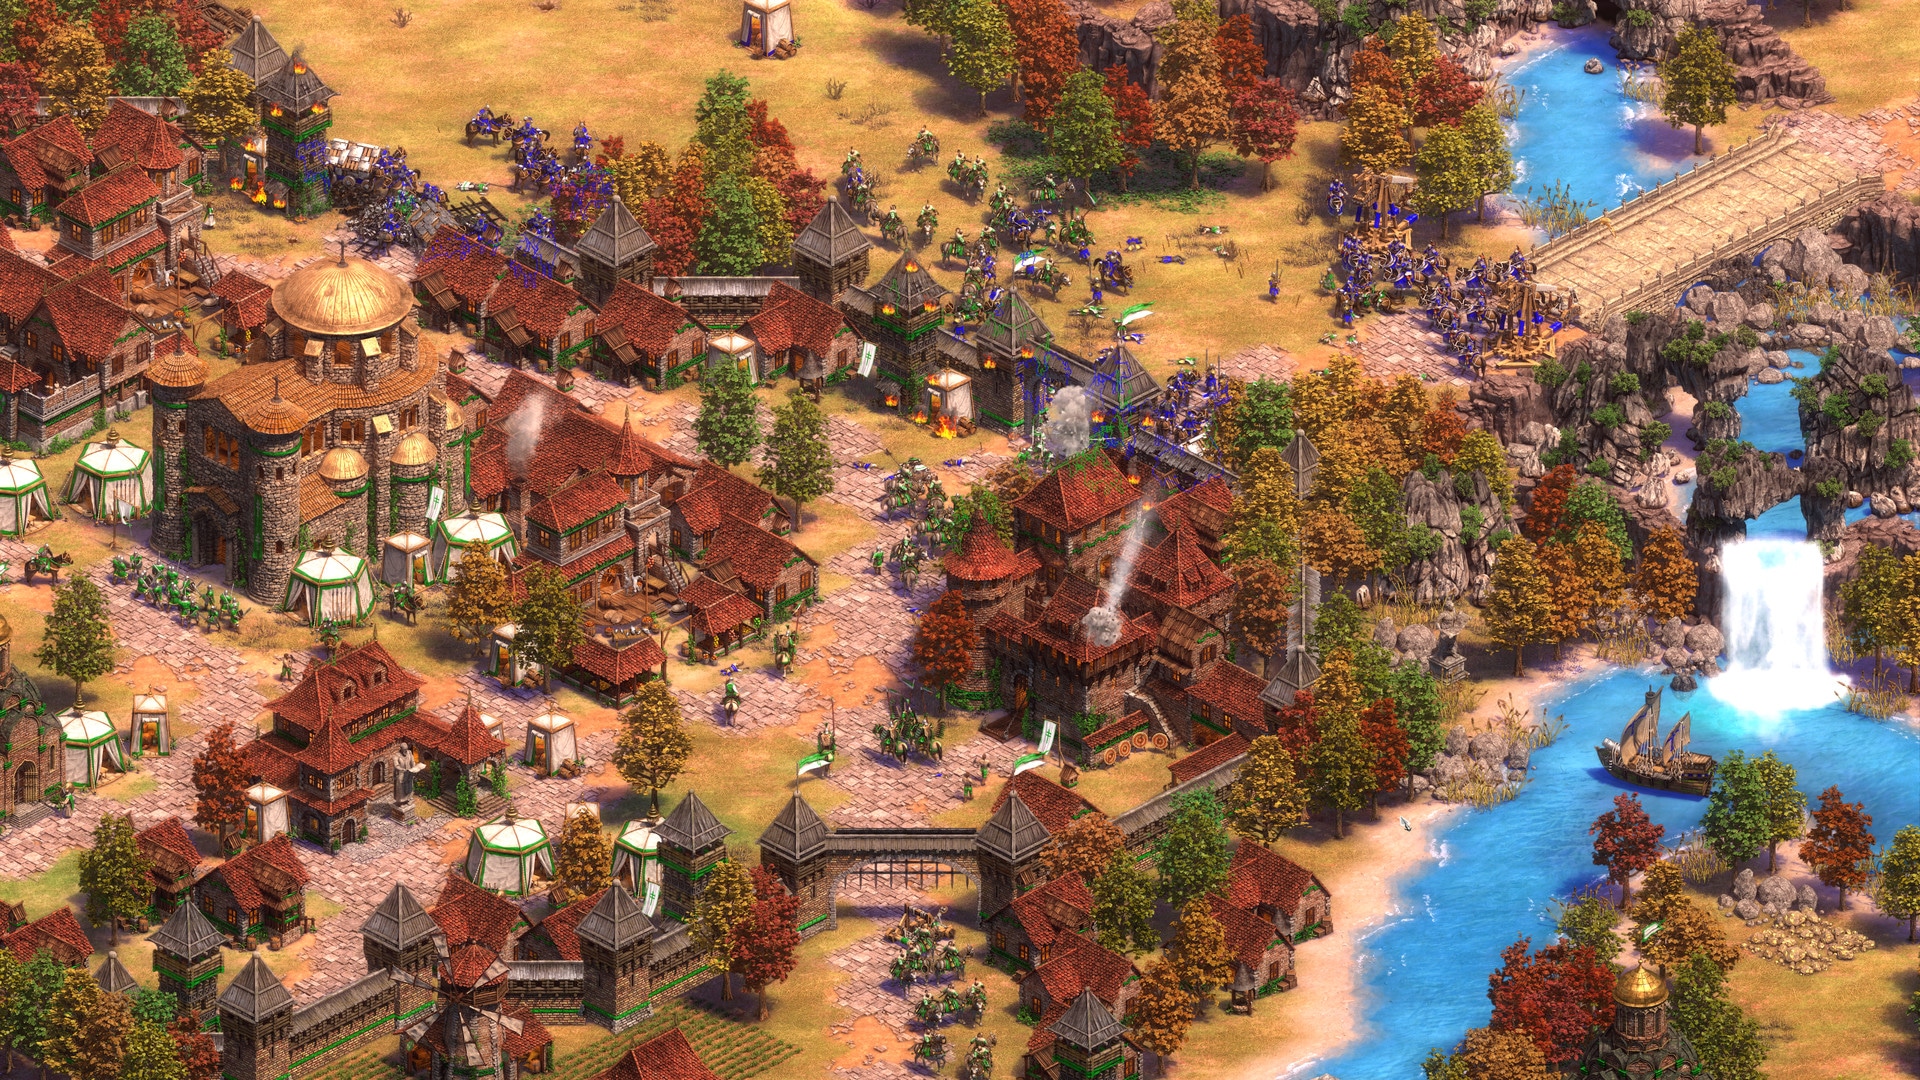 VIRTUOS-SPARX* PRODUCED ABUNDANT FX AND ART ASSETS FOR AGE OF EMPIRES II: DEFINITIVE EDITION